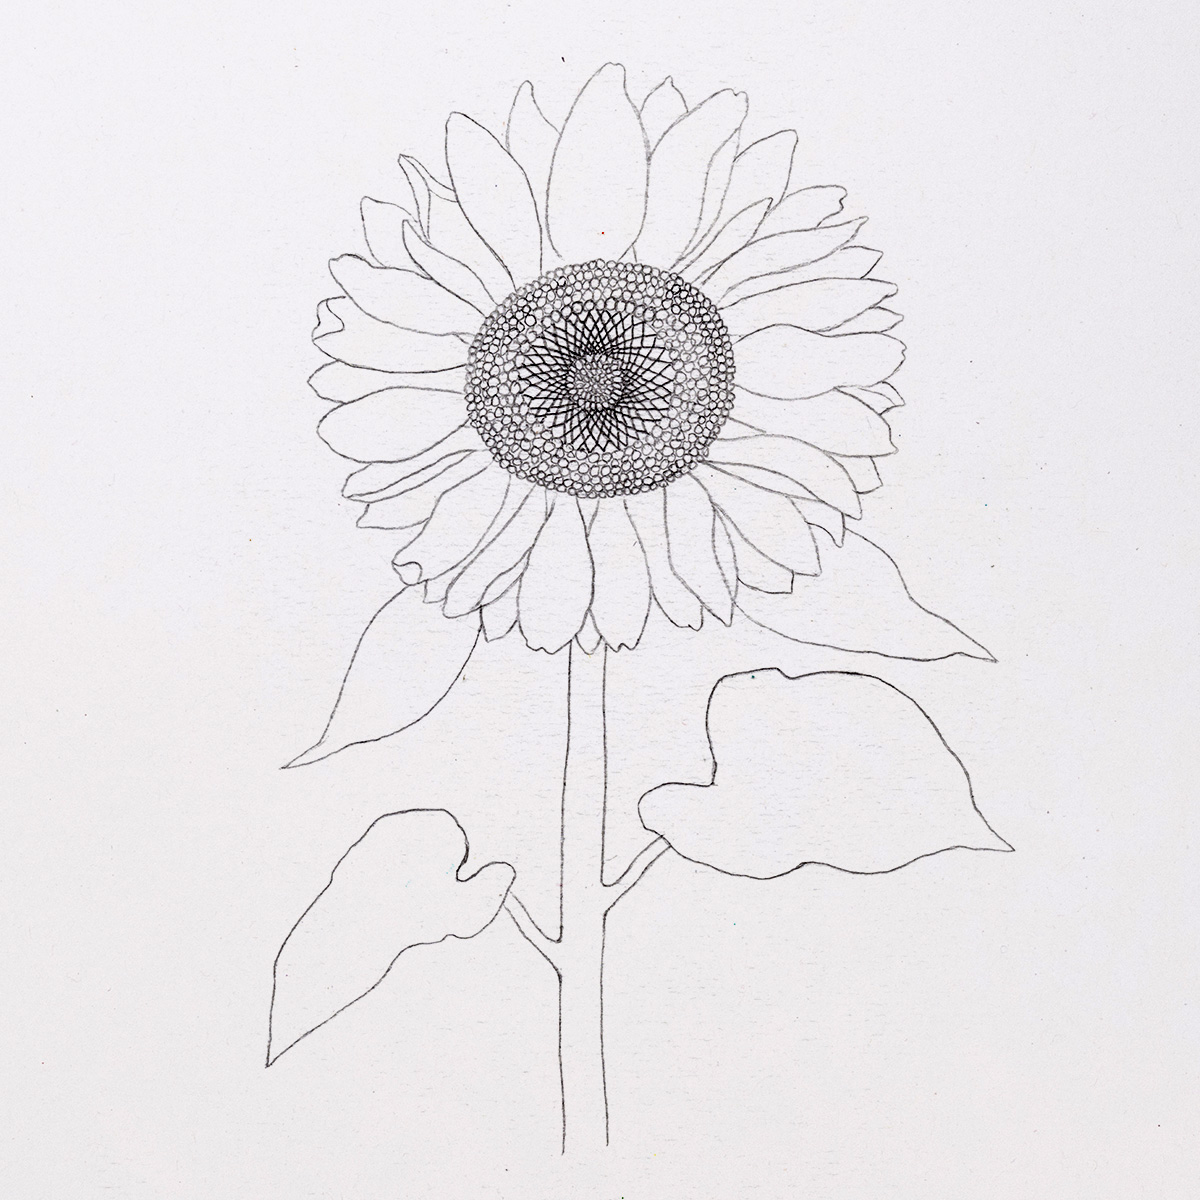 Gothic Sunflower Pencil sketch - Flower drawing -Black and white sketch by  CallisC 